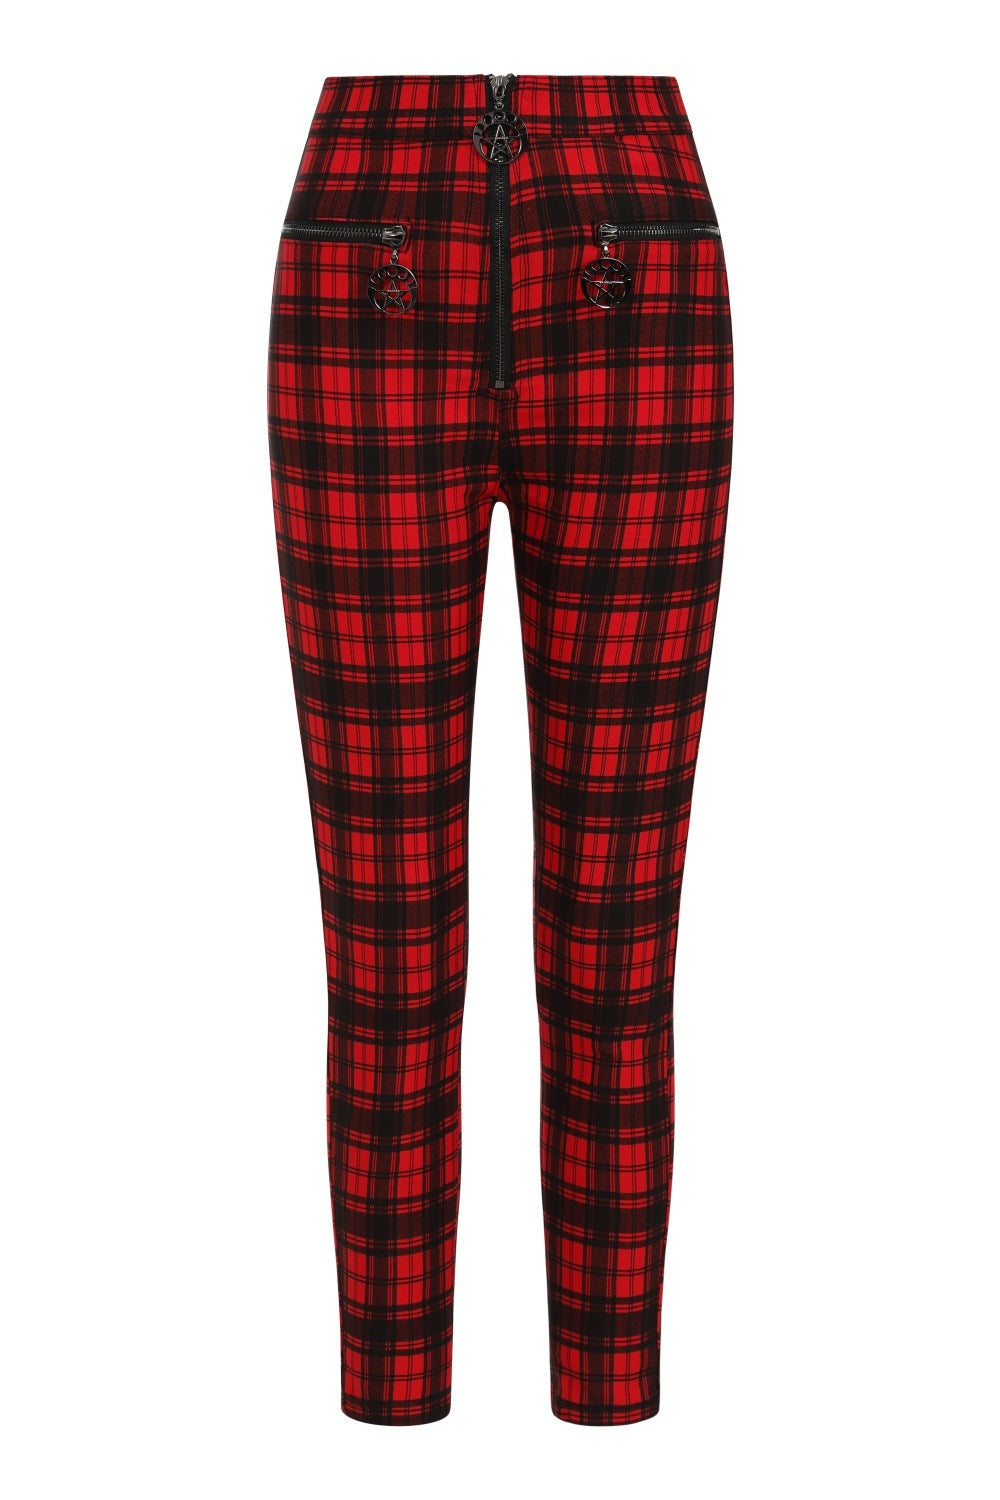 High waisted trousers in red tartan with zip front and pentagram zip details